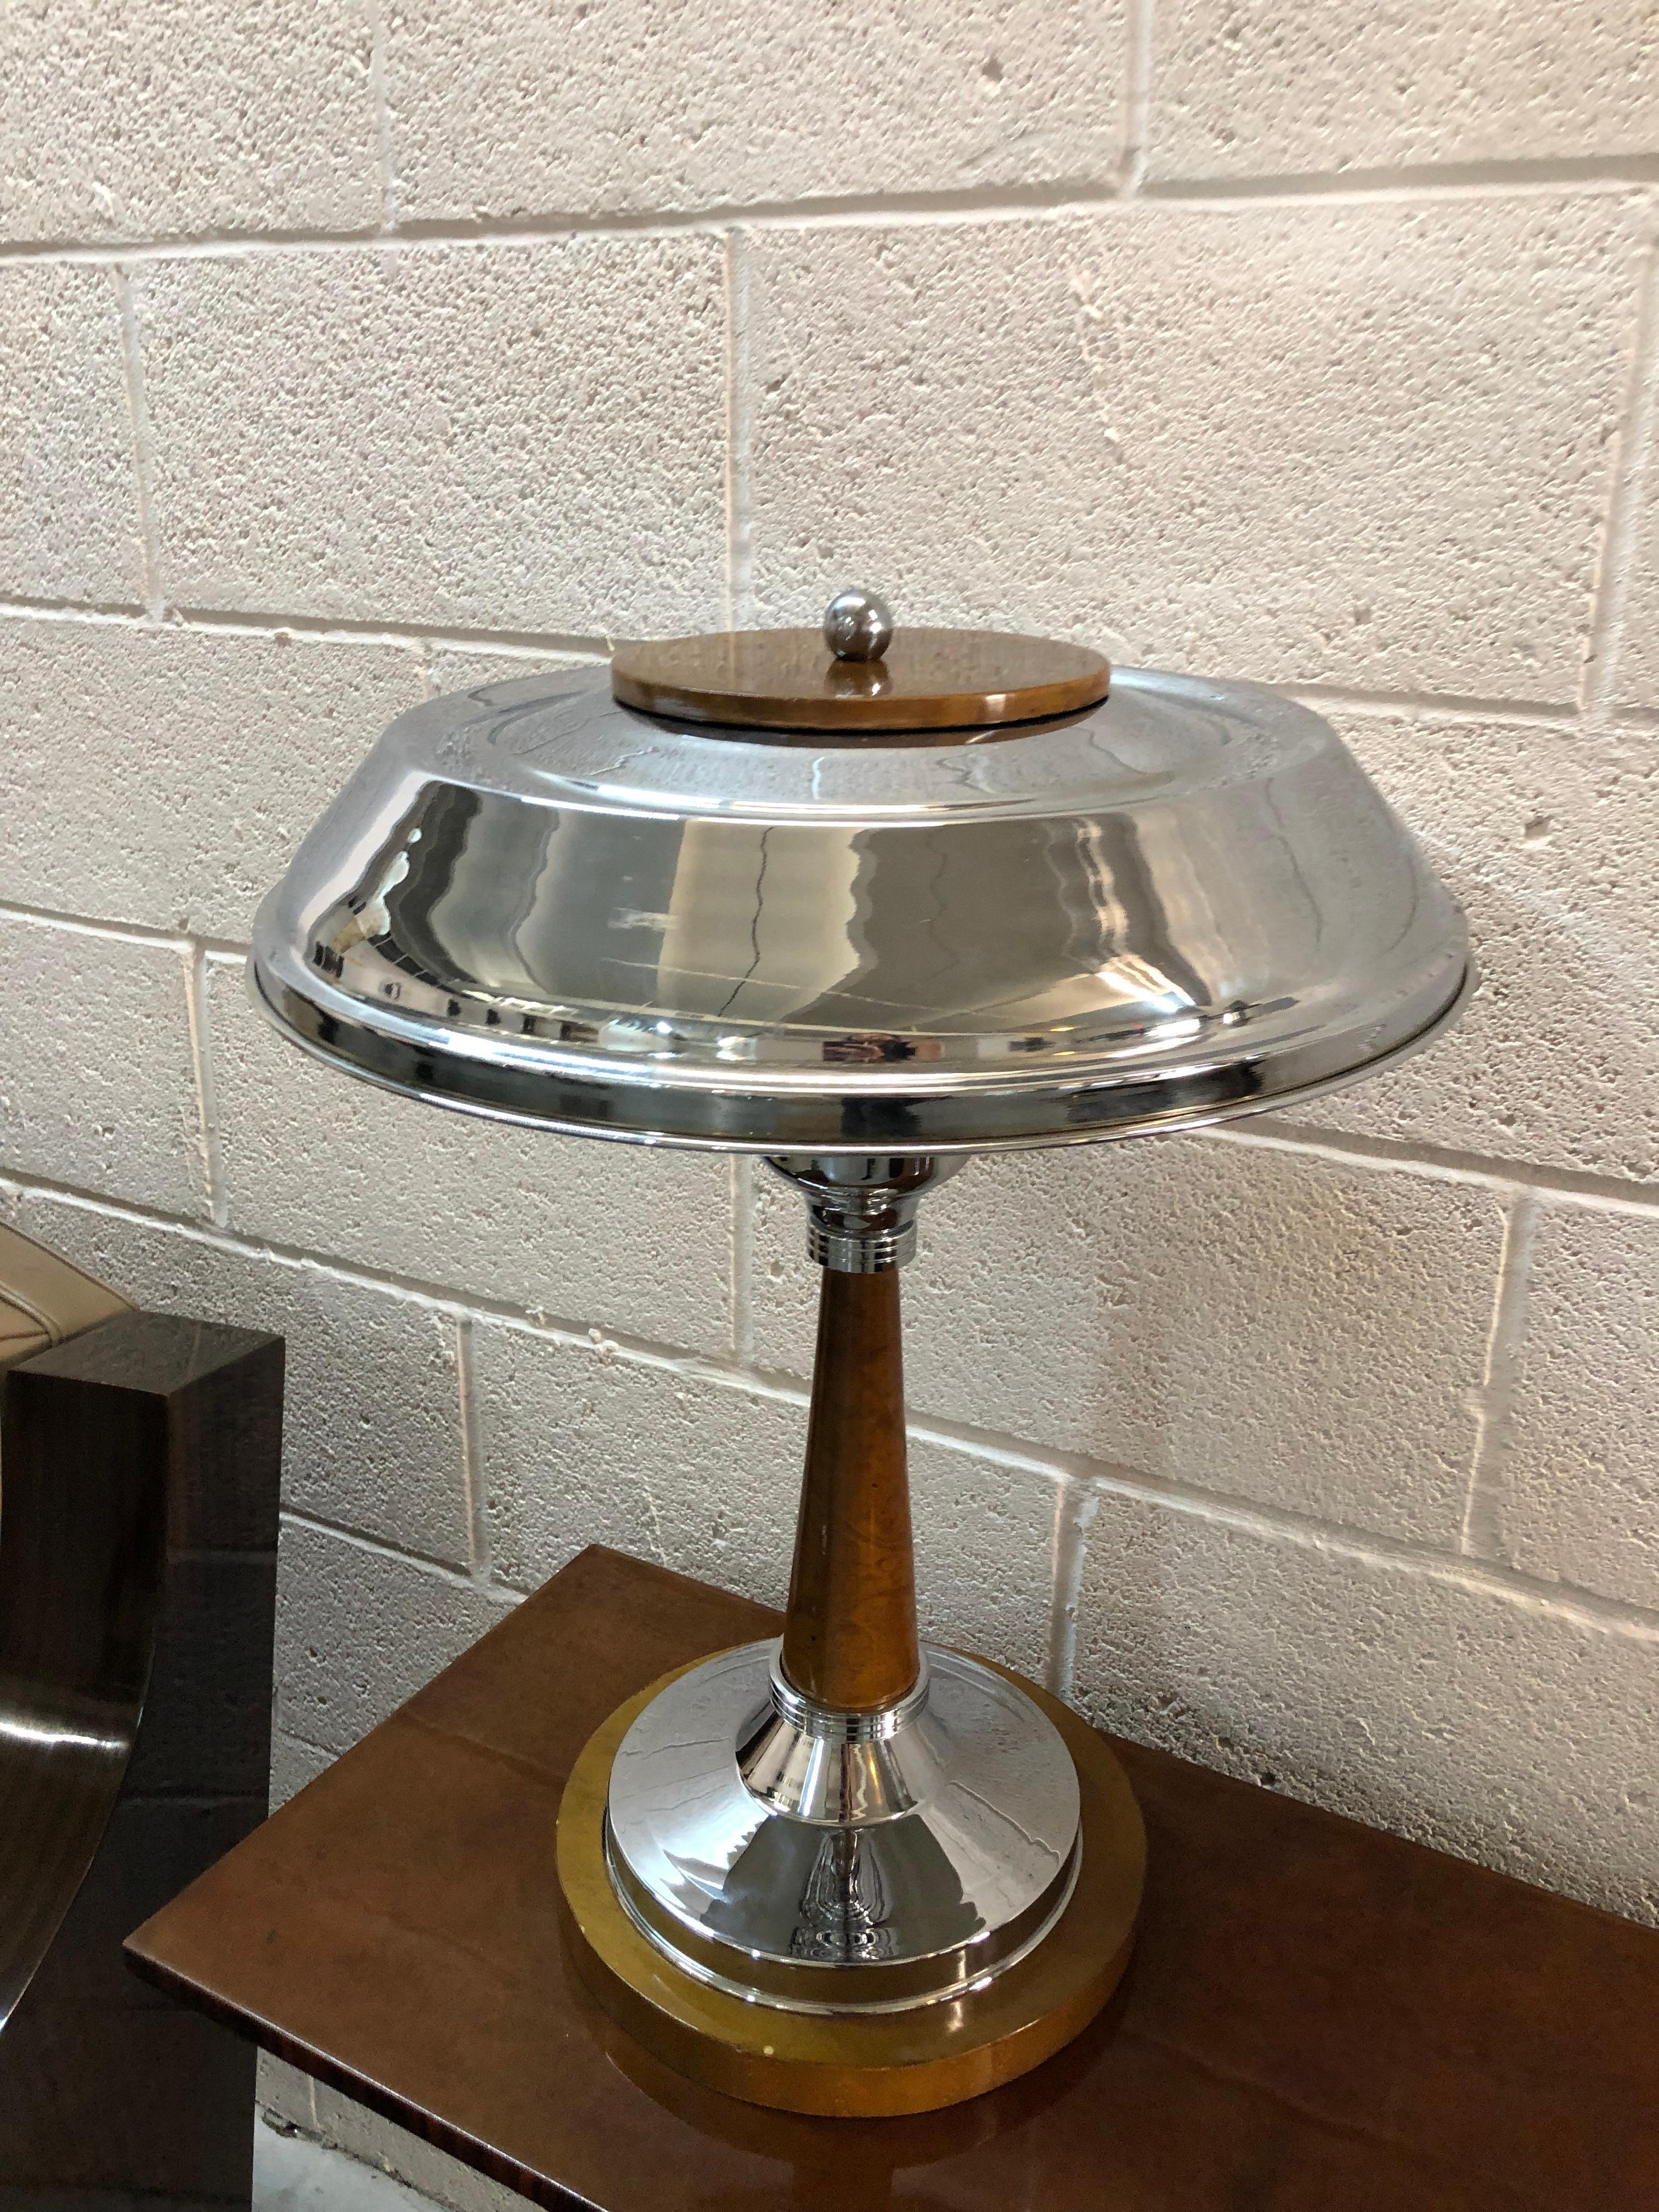 Pair of Art Deco Table Lamps in wood and chrome, 1920, France For Sale 4